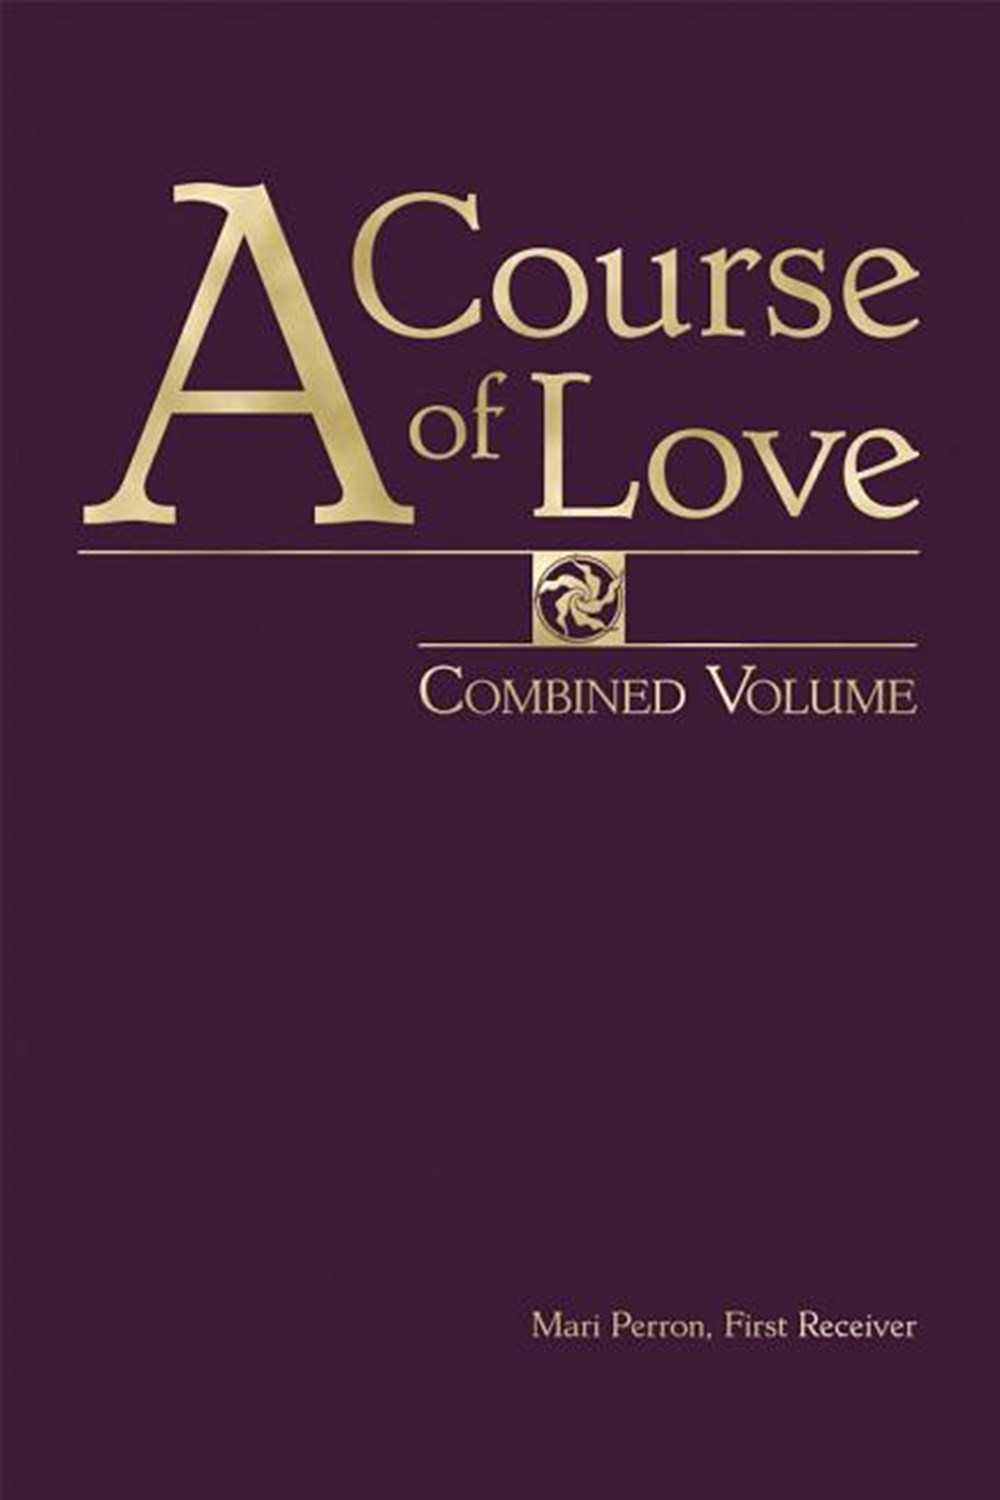 Course of Love Combined Volume